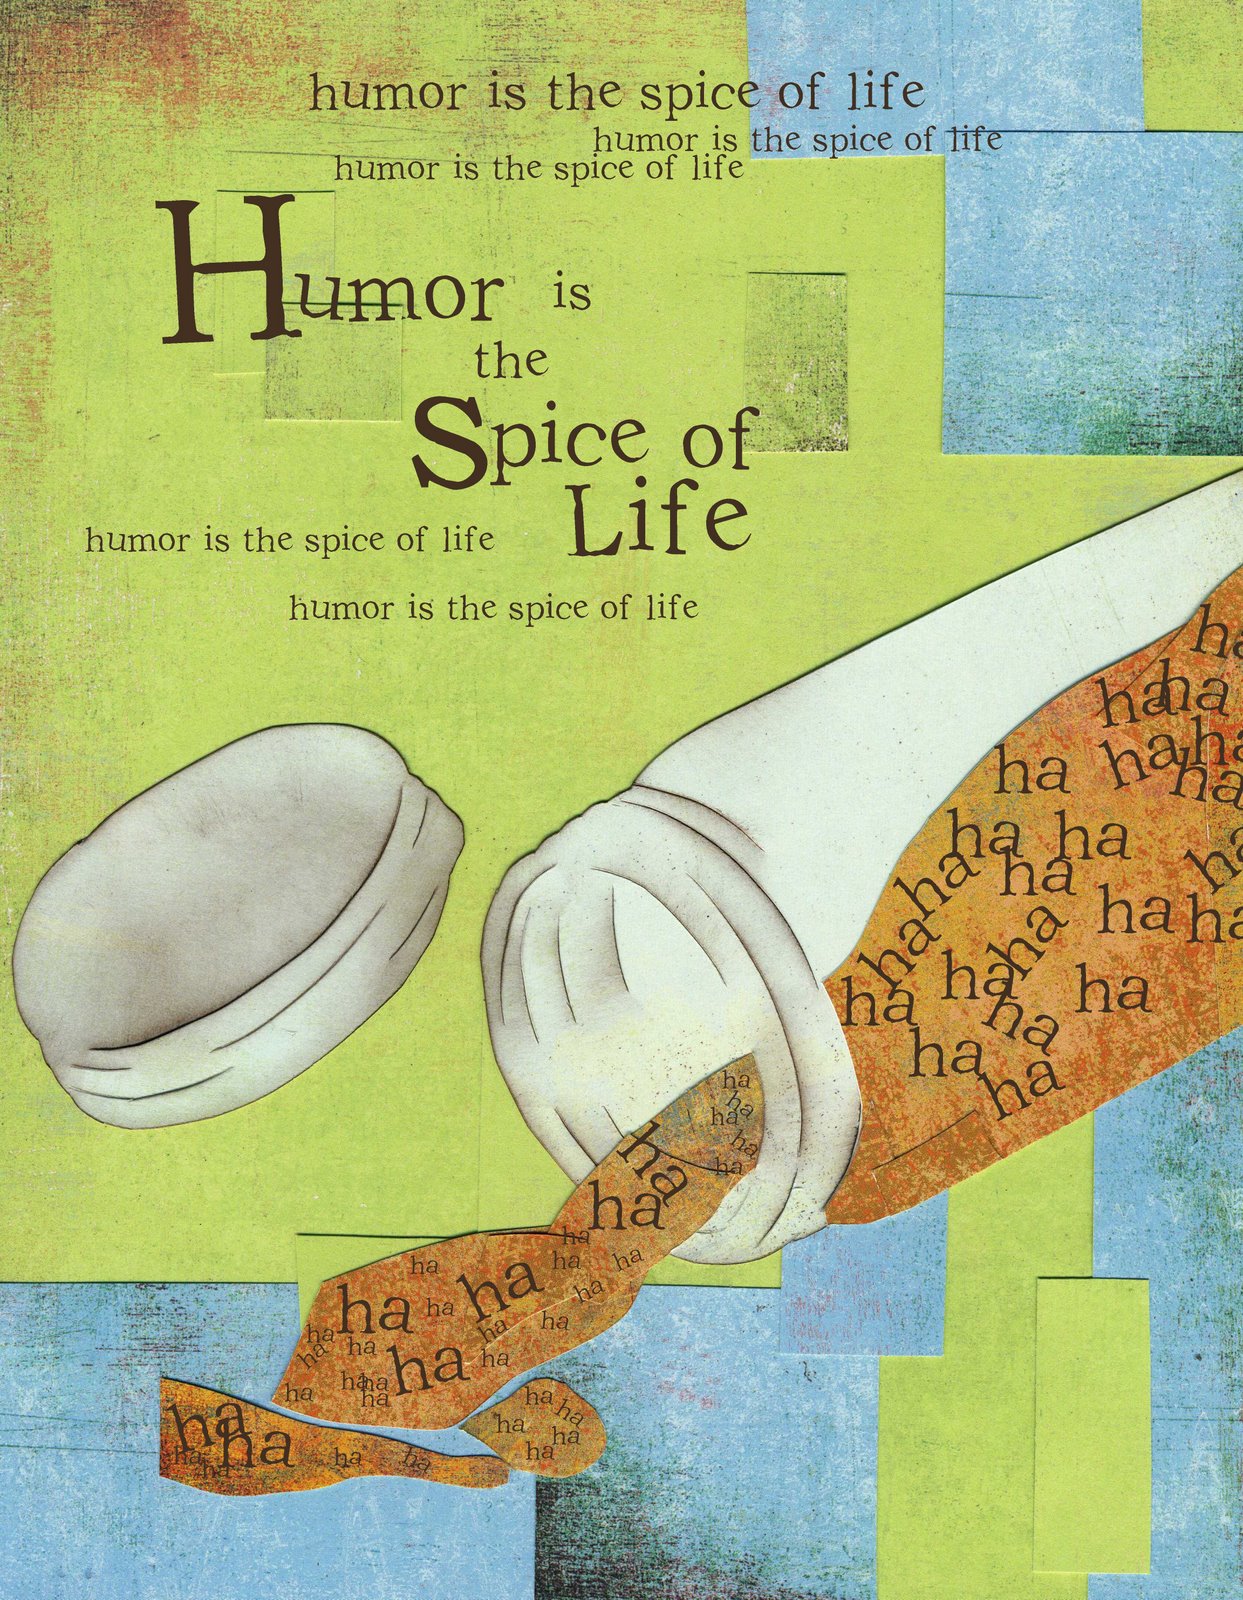 [humor+is+the+spice+of+life.jpg]